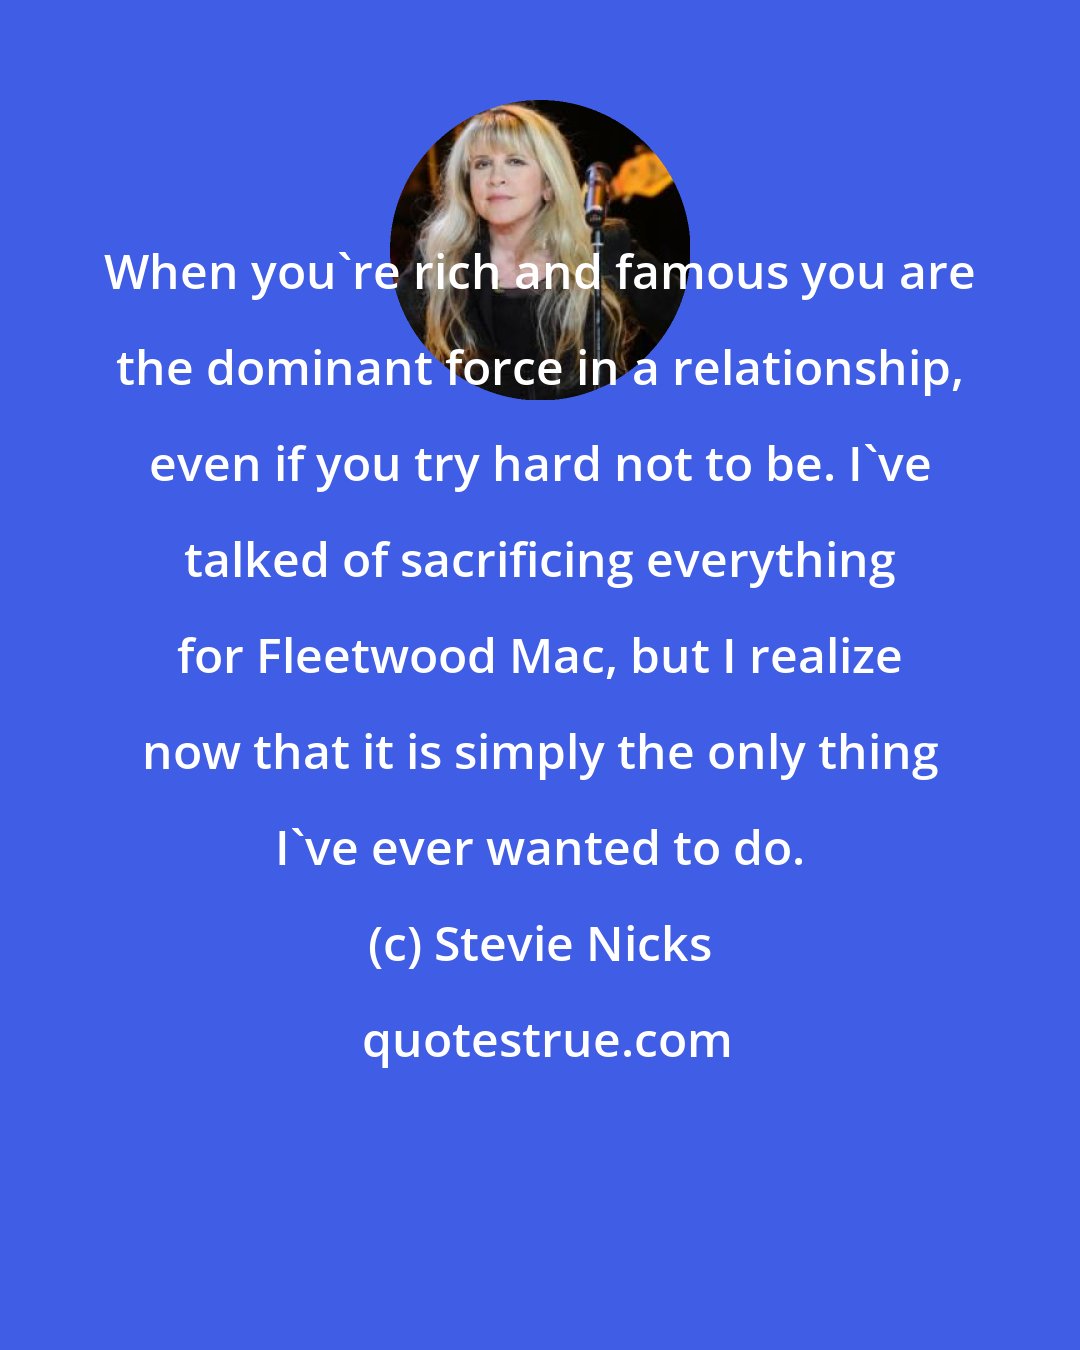 Stevie Nicks: When you're rich and famous you are the dominant force in a relationship, even if you try hard not to be. I've talked of sacrificing everything for Fleetwood Mac, but I realize now that it is simply the only thing I've ever wanted to do.